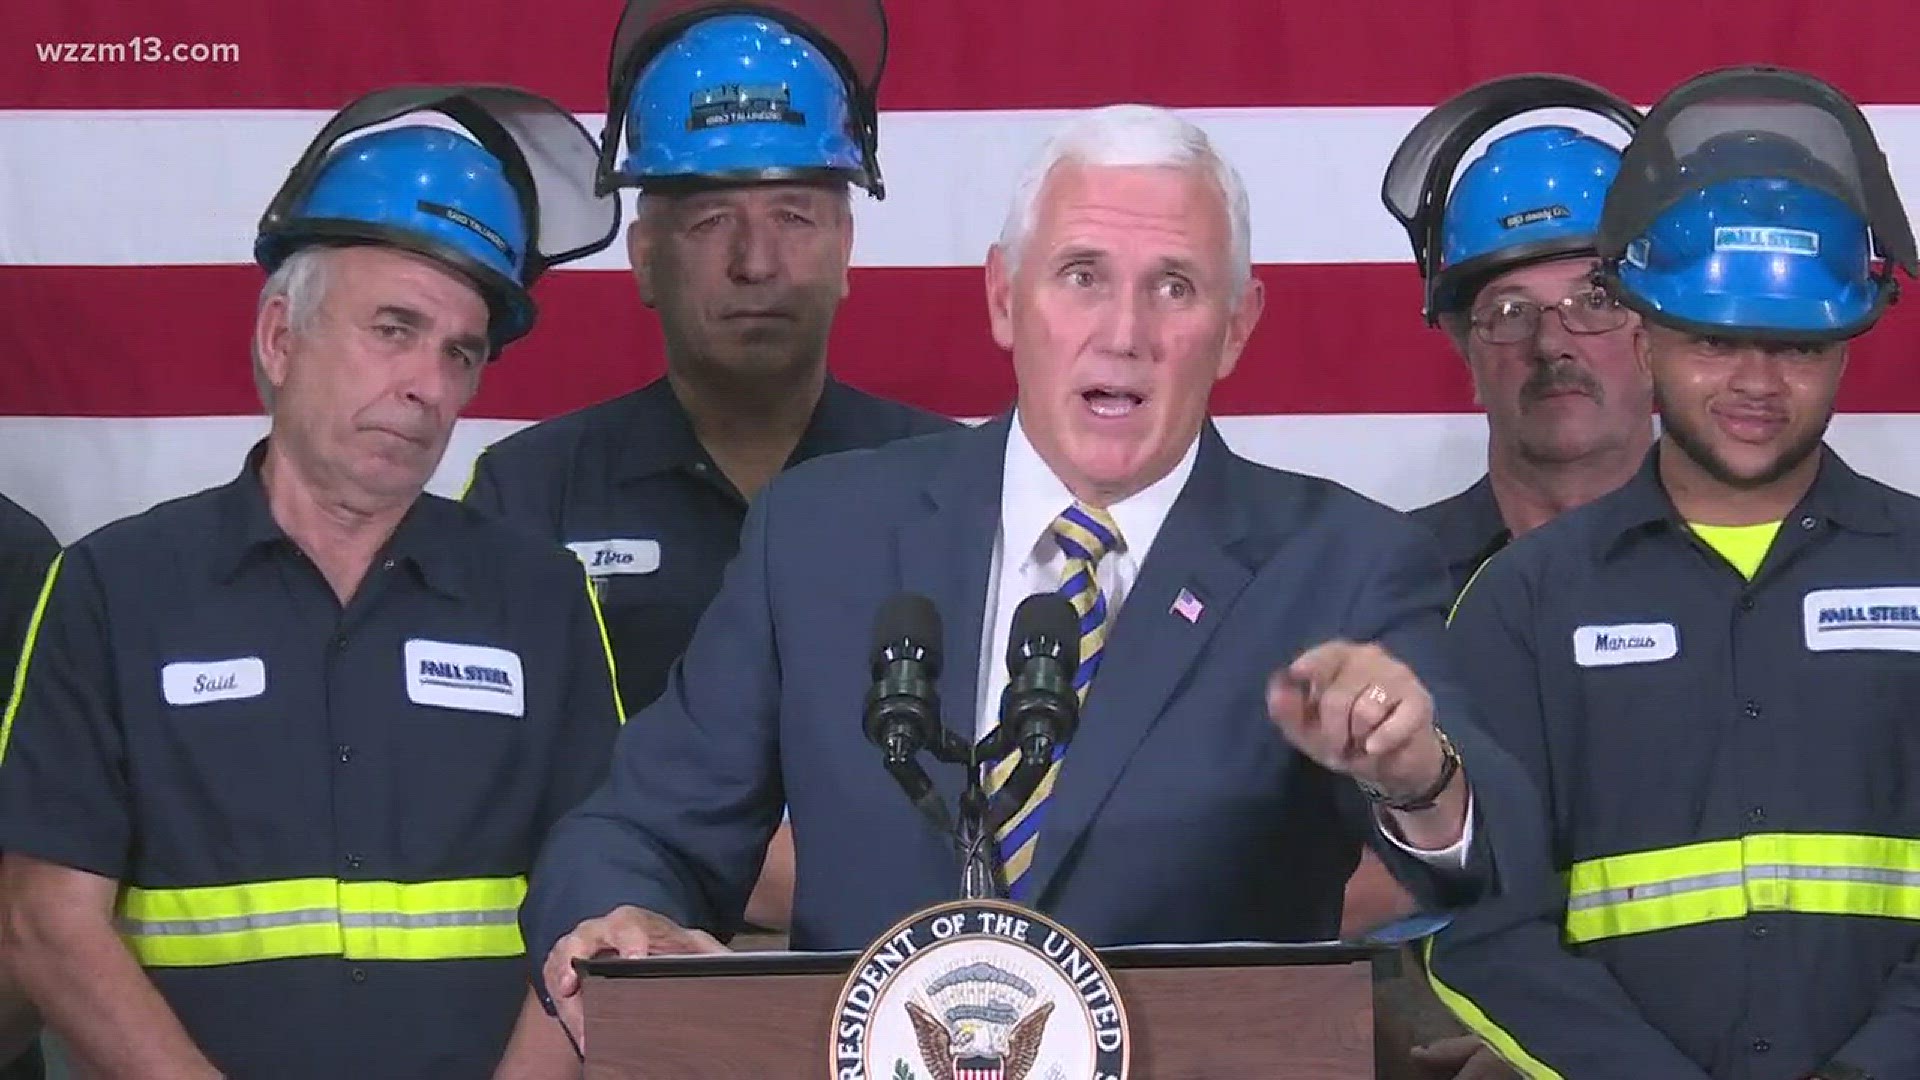 Mike Pence visits West Michigan